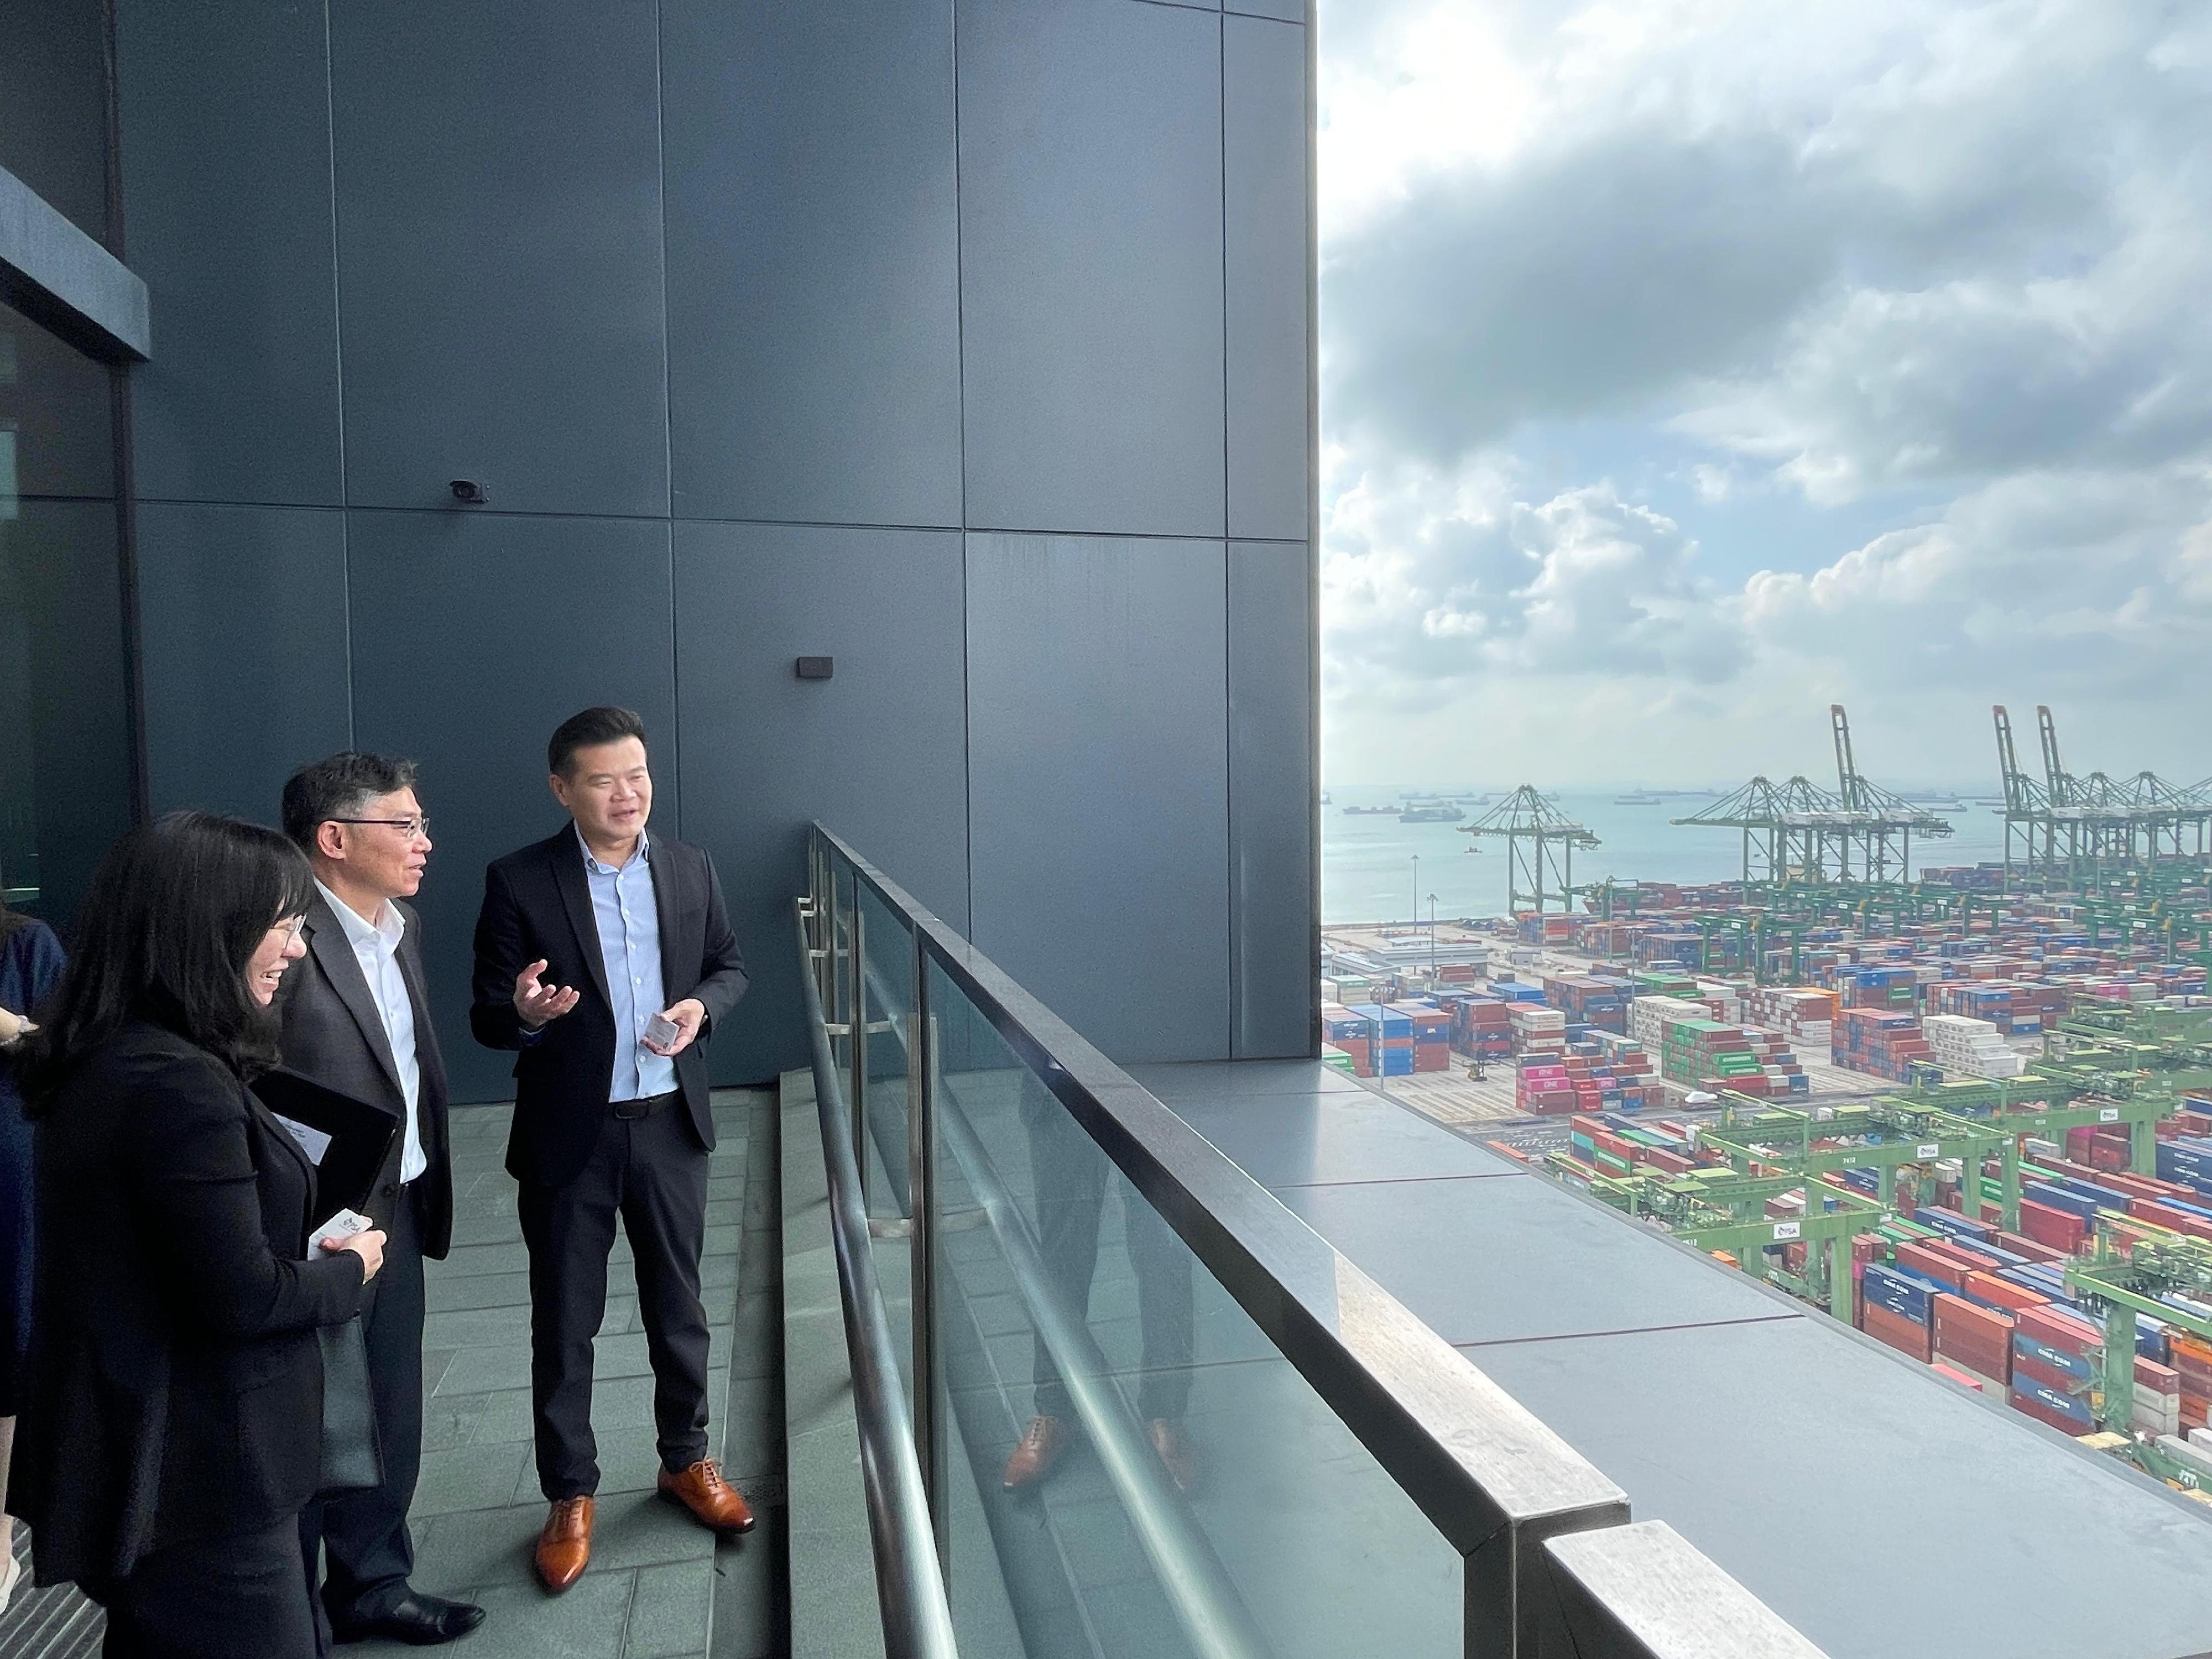 The Secretary for Transport and Logistics, Mr Lam Sai-hung (centre), began his visit programme to Singapore today (January 30). Photo shows Mr Lam, accompanied by the Commissioner for Maritime and Port Development and Deputy Secretary for Transport and Logistics, Miss Amy Chan (left), visiting the port in Singapore where he had a bird's eye view of the Pasir Panjang Terminals.